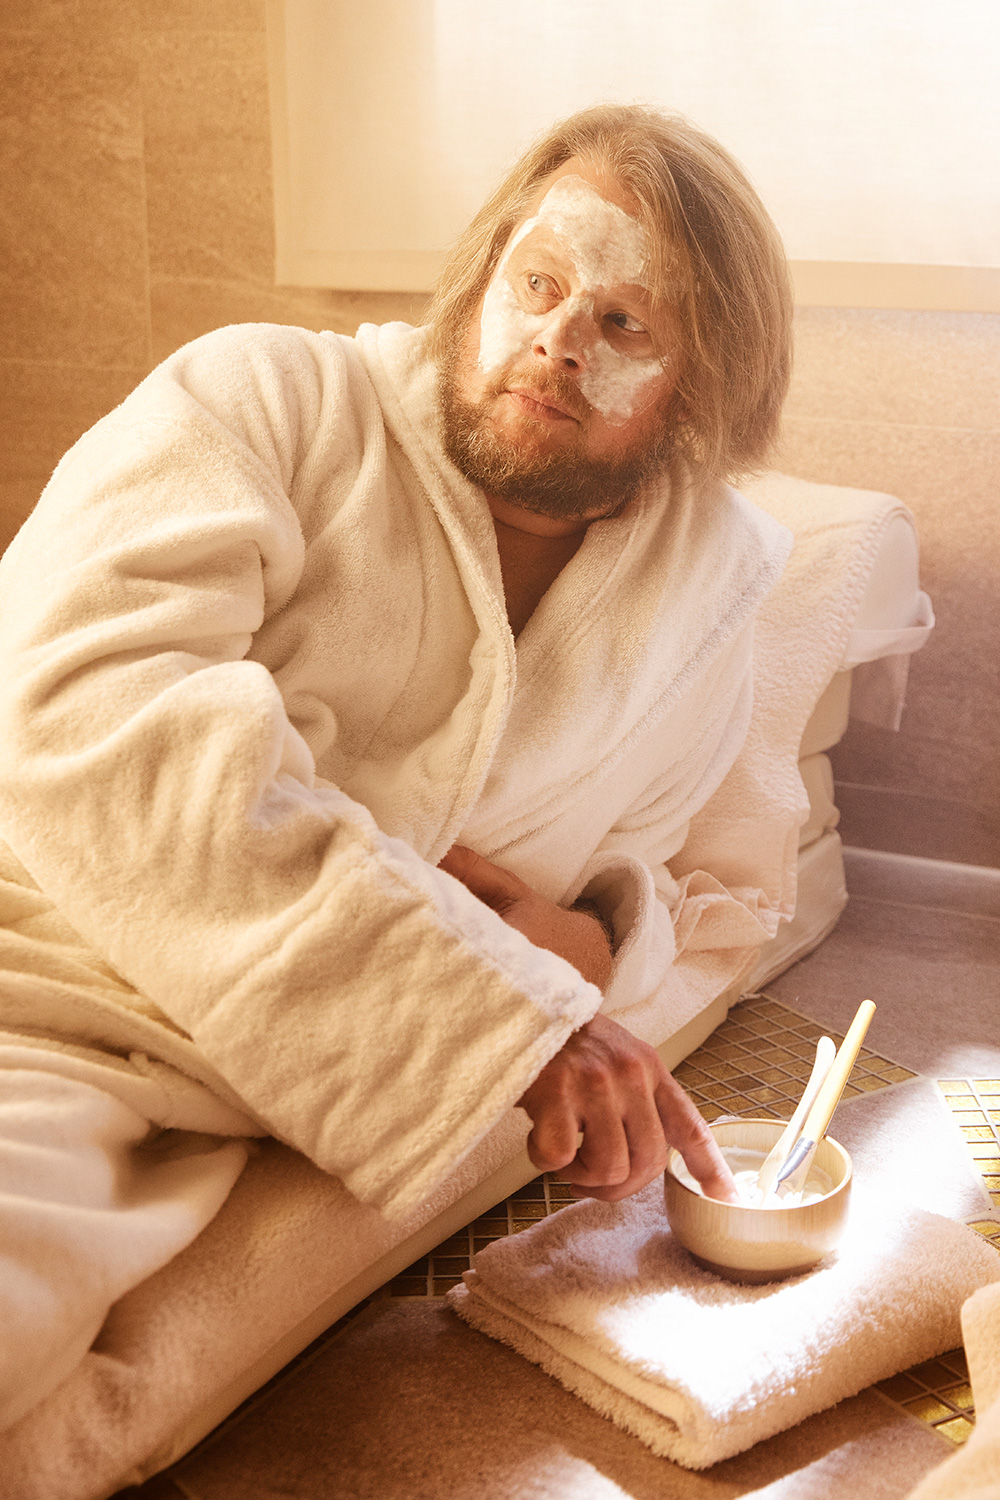 Man lying on a massage table in a bath robe with a face mask on